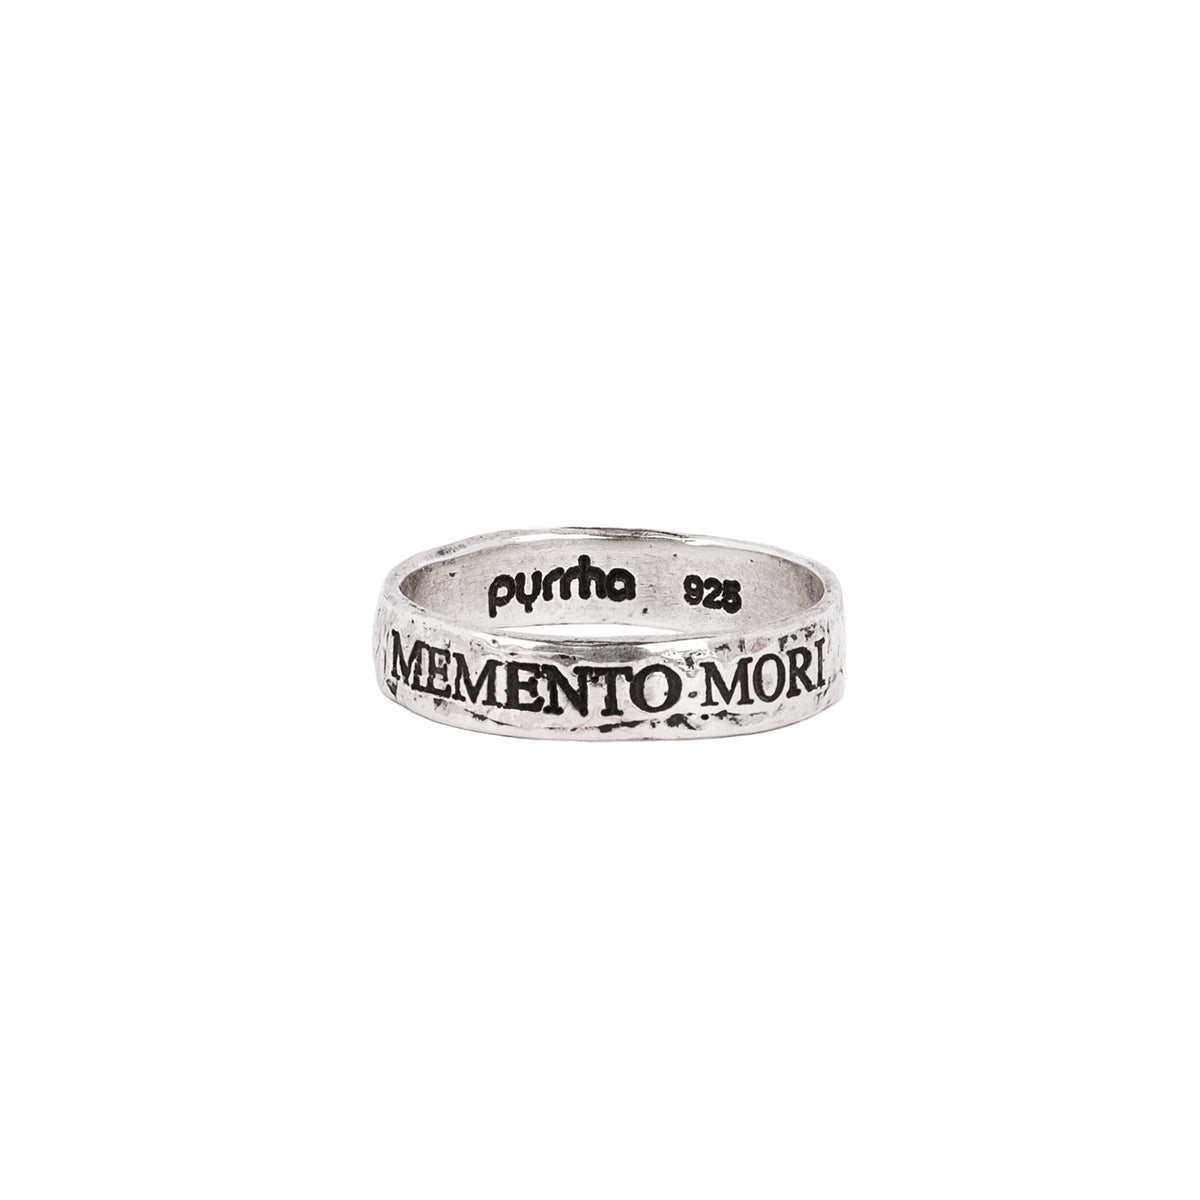 A silver band ring with the phrase Memento Mori engraved into it